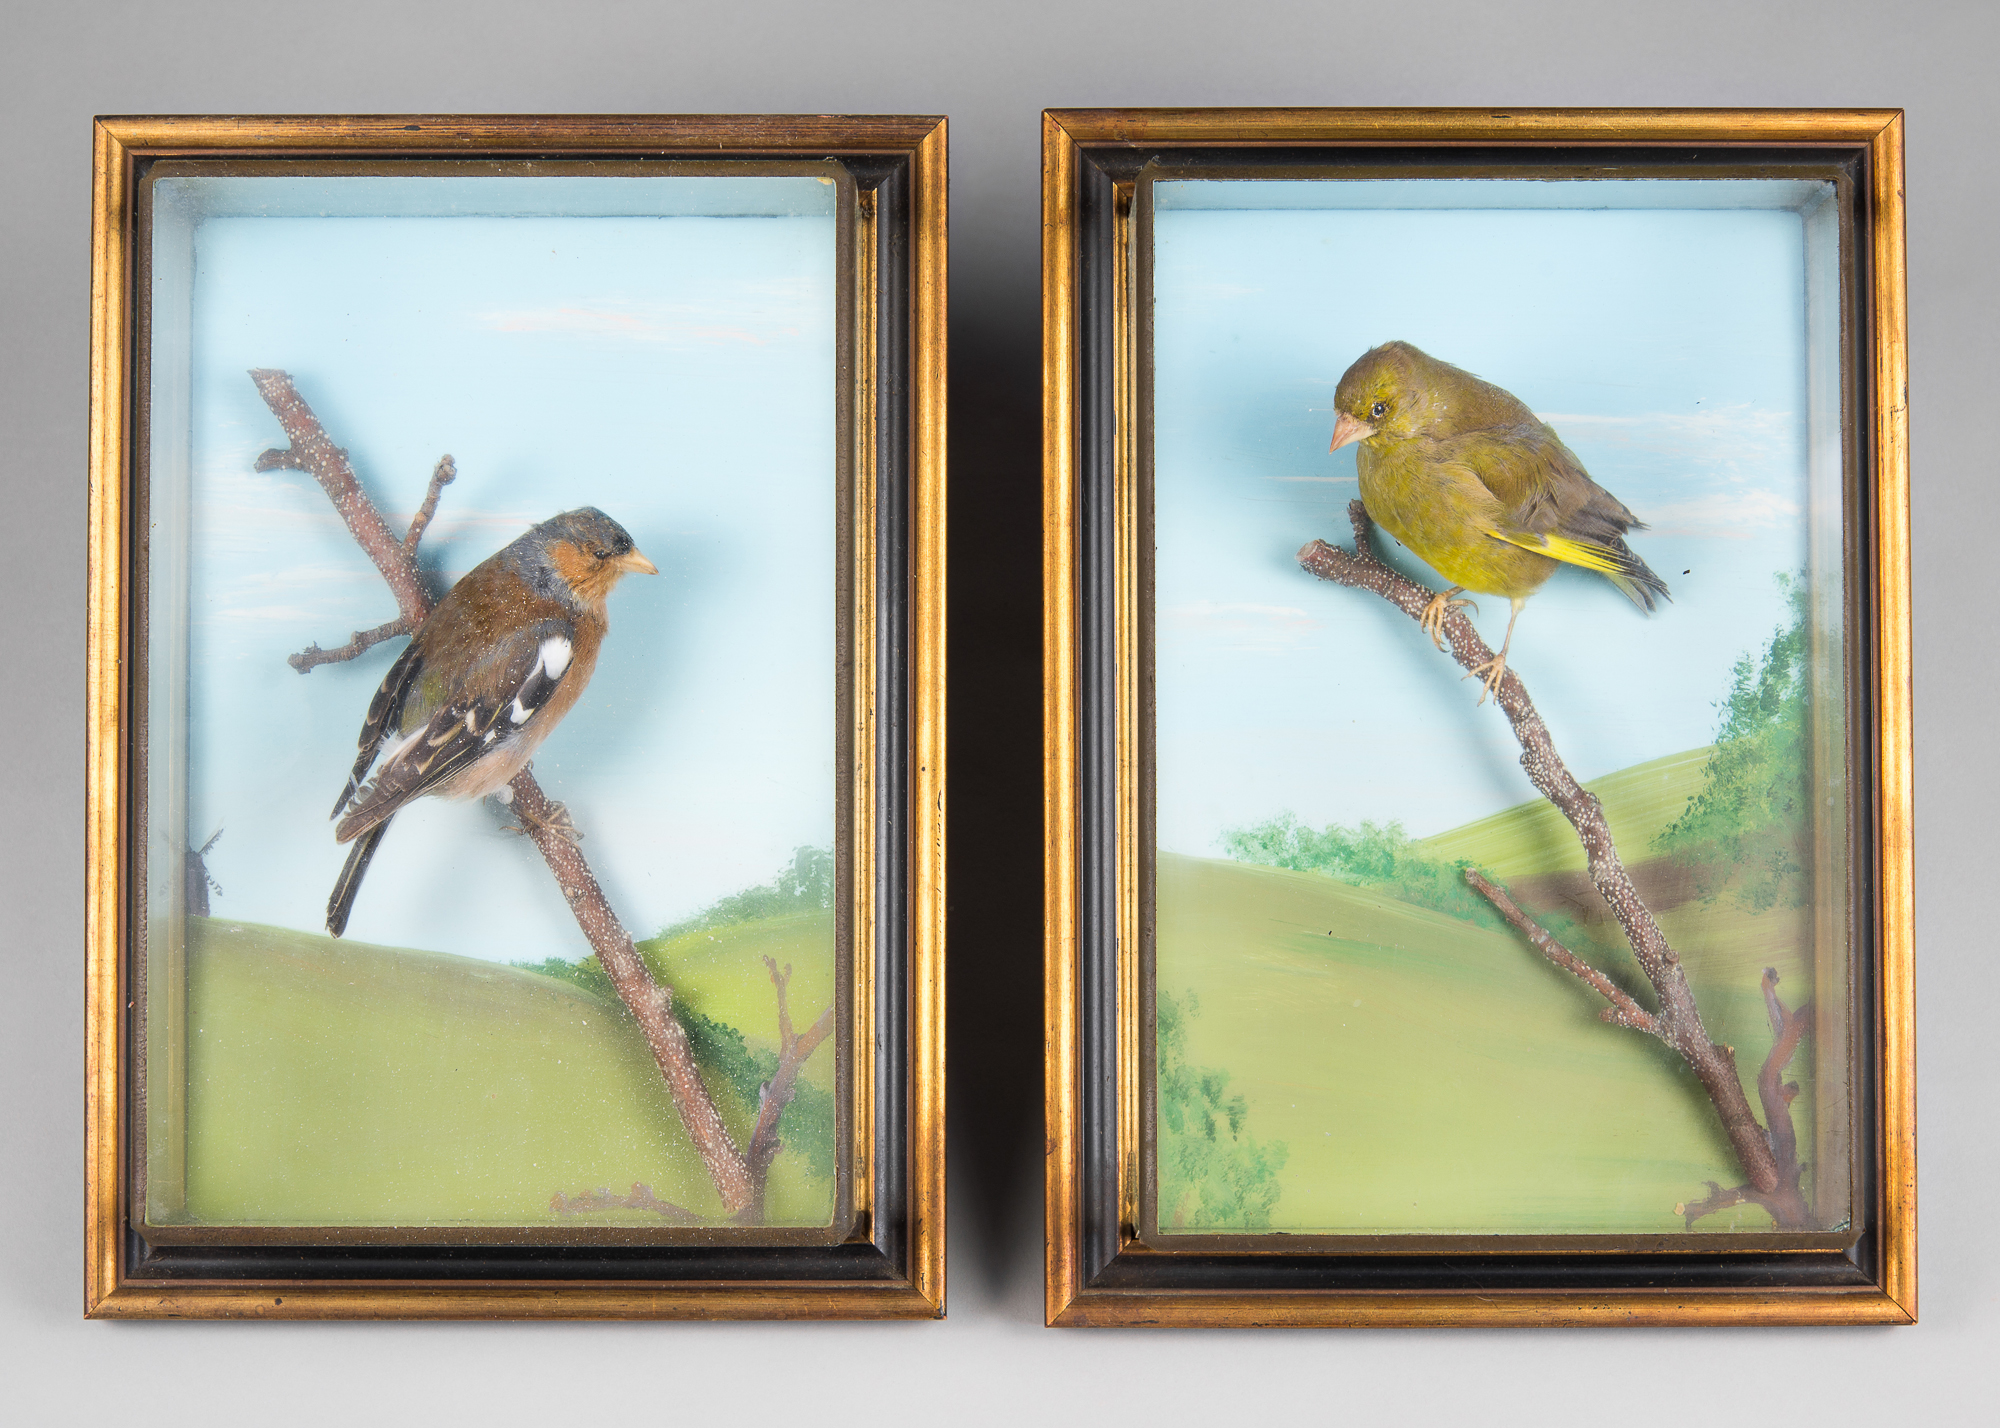 A PAIR OF 20TH CENTURY TAXIDERMY CASED BIRDS COMPRISING OF A CHAFFINCH AND A GREENFINCH.